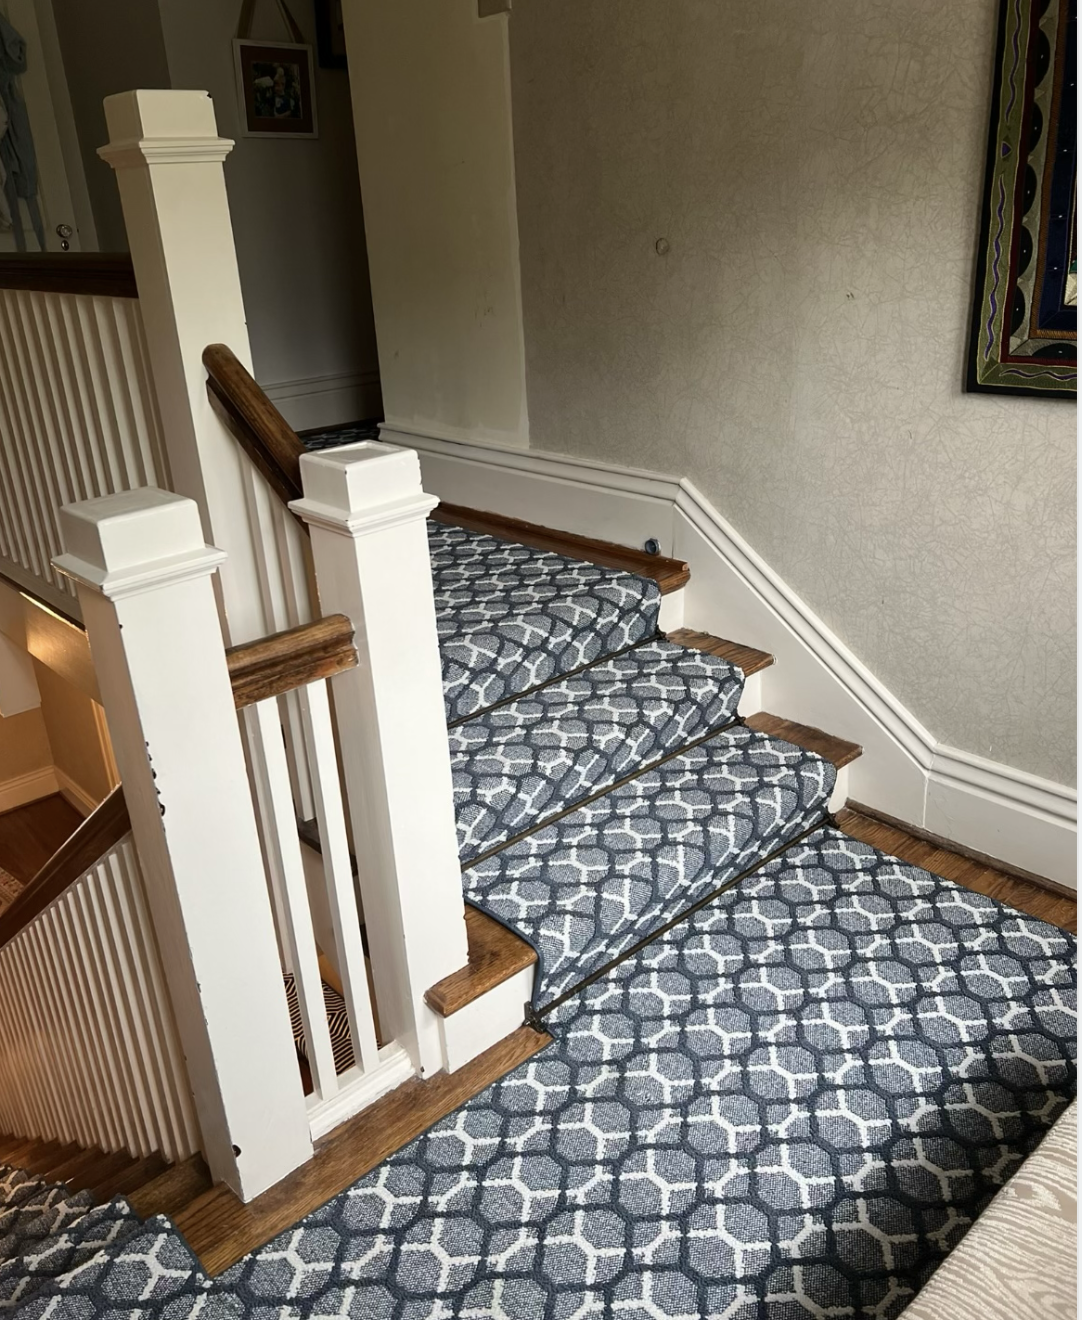 Stair Runners:

Looking to give your stairs a luxury and tailored look?  Visit Carpet One Lexington and choose from the hundreds of remnants we have in stock to find what you'll love in your space.